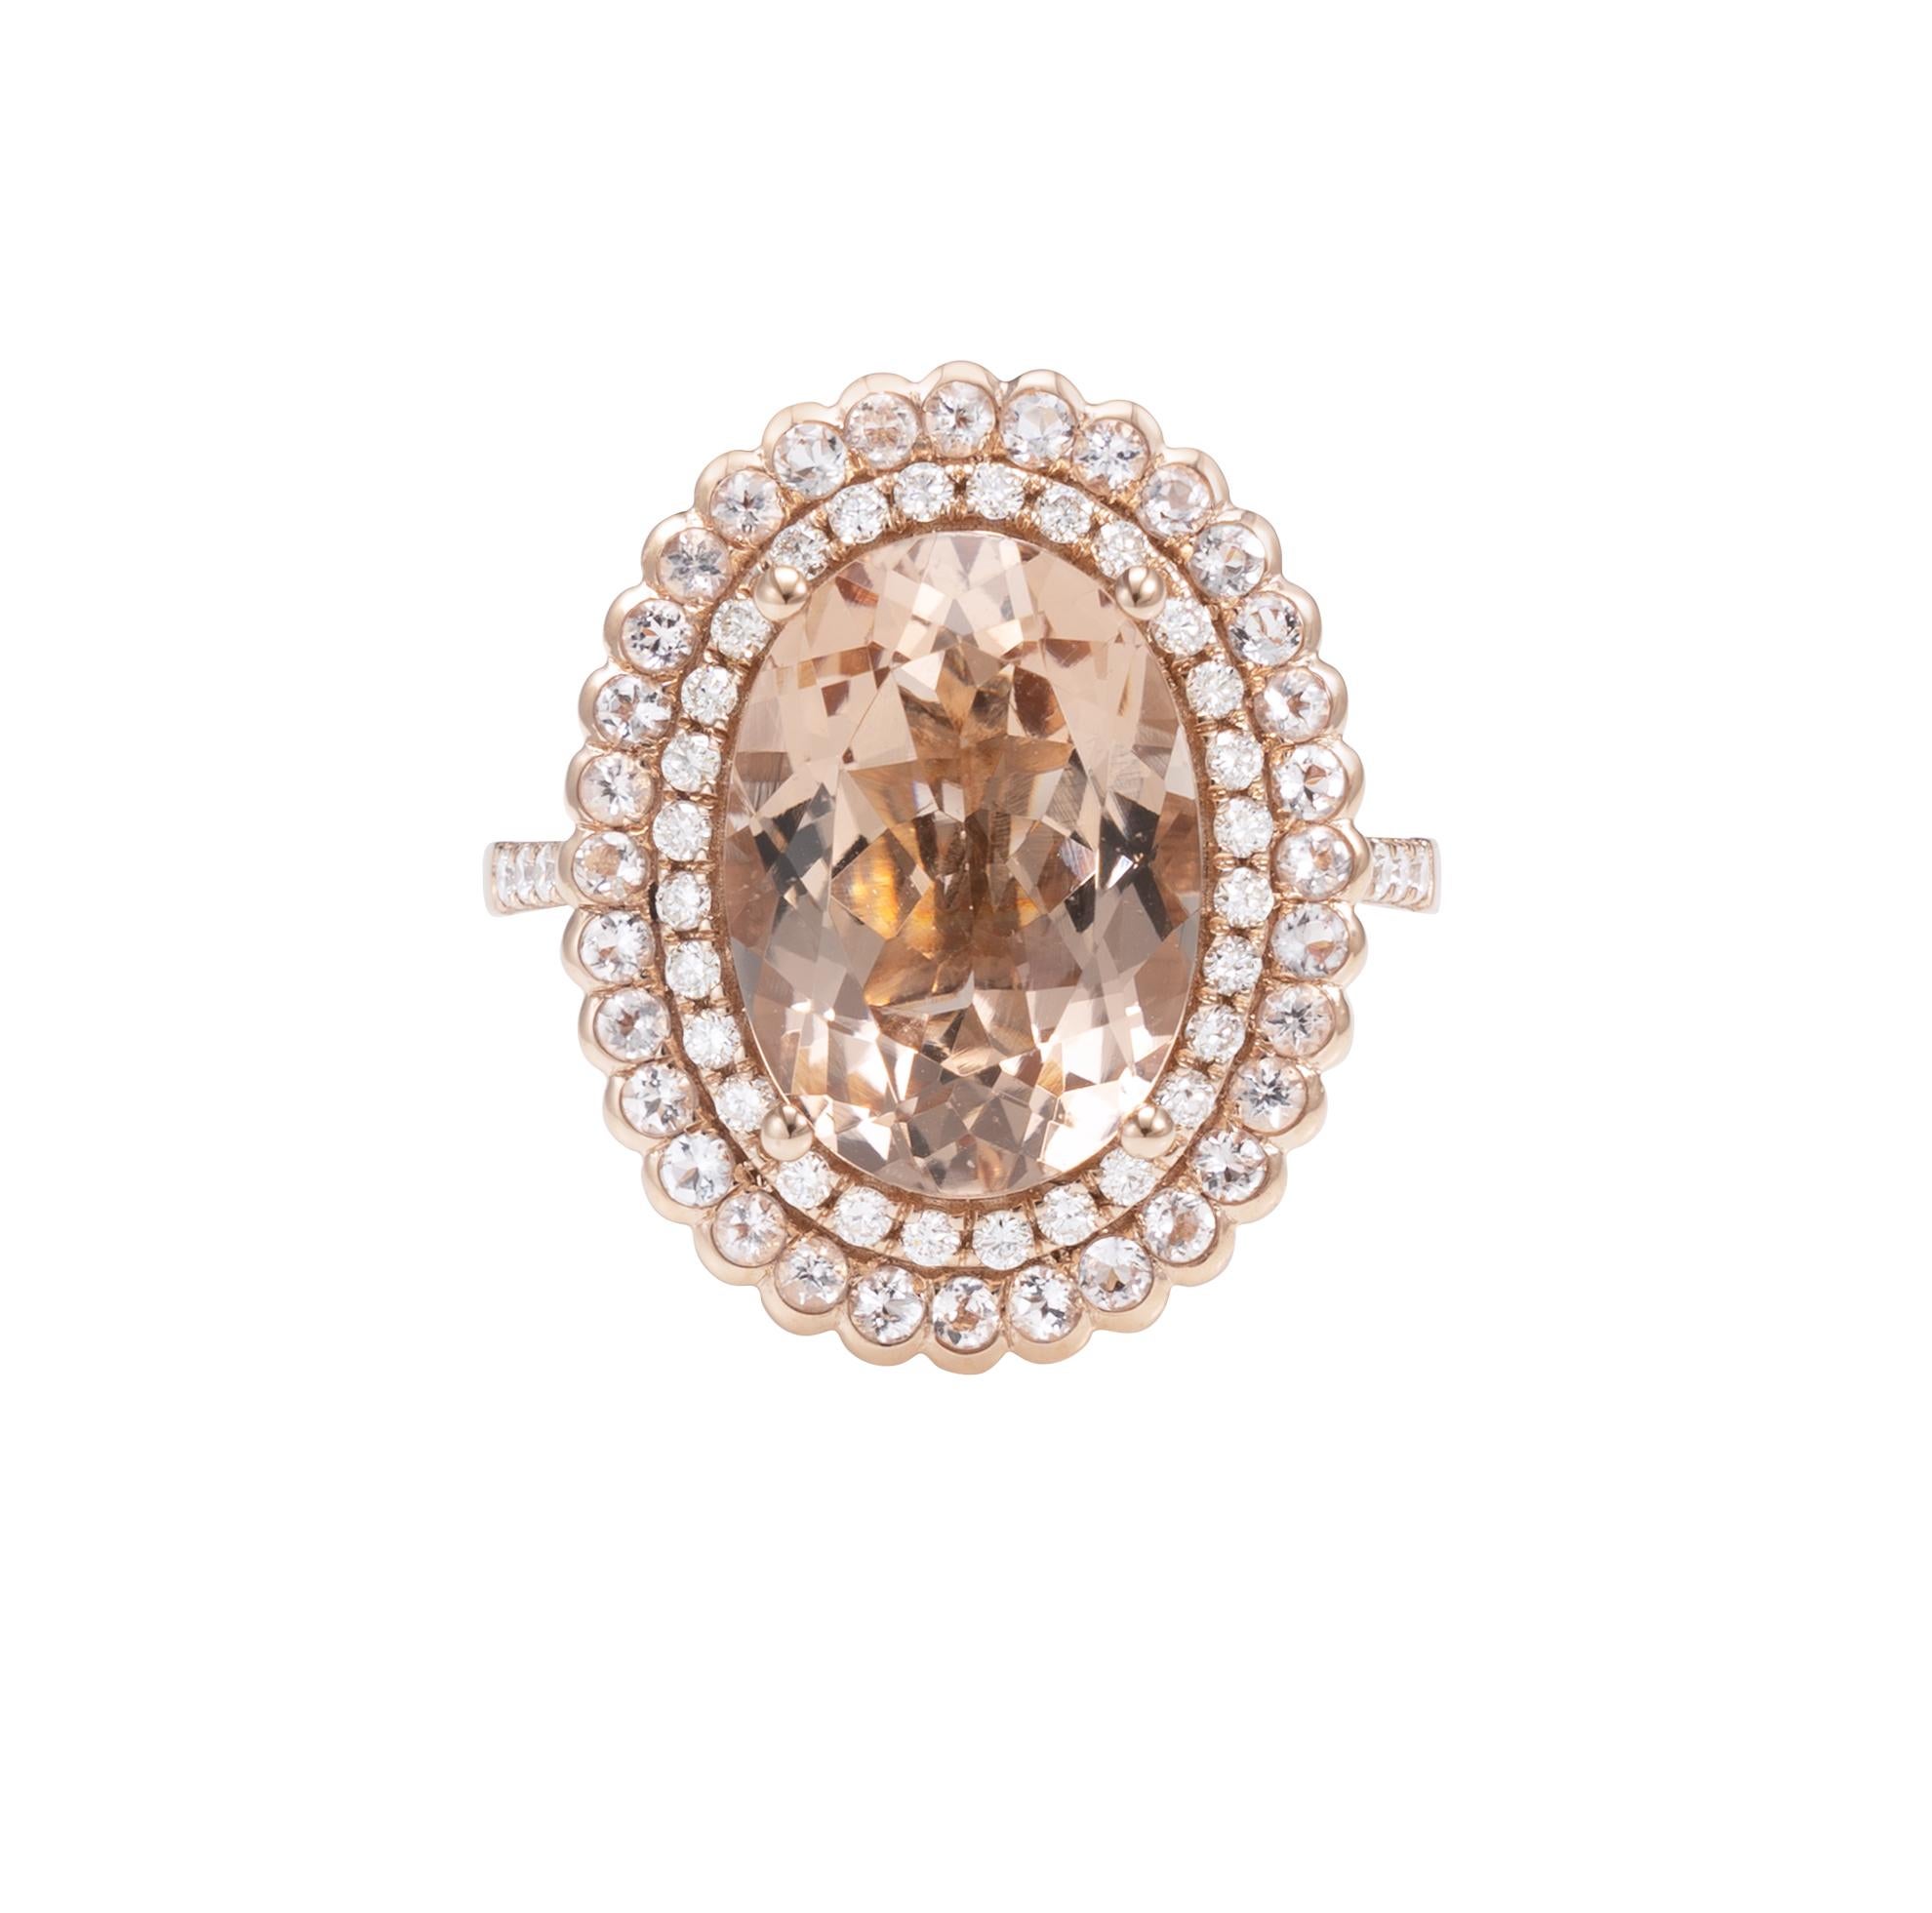 Contemporary 5.6 Carat Morganite and Diamond Ring in 18 Karat Rose Gold For Sale